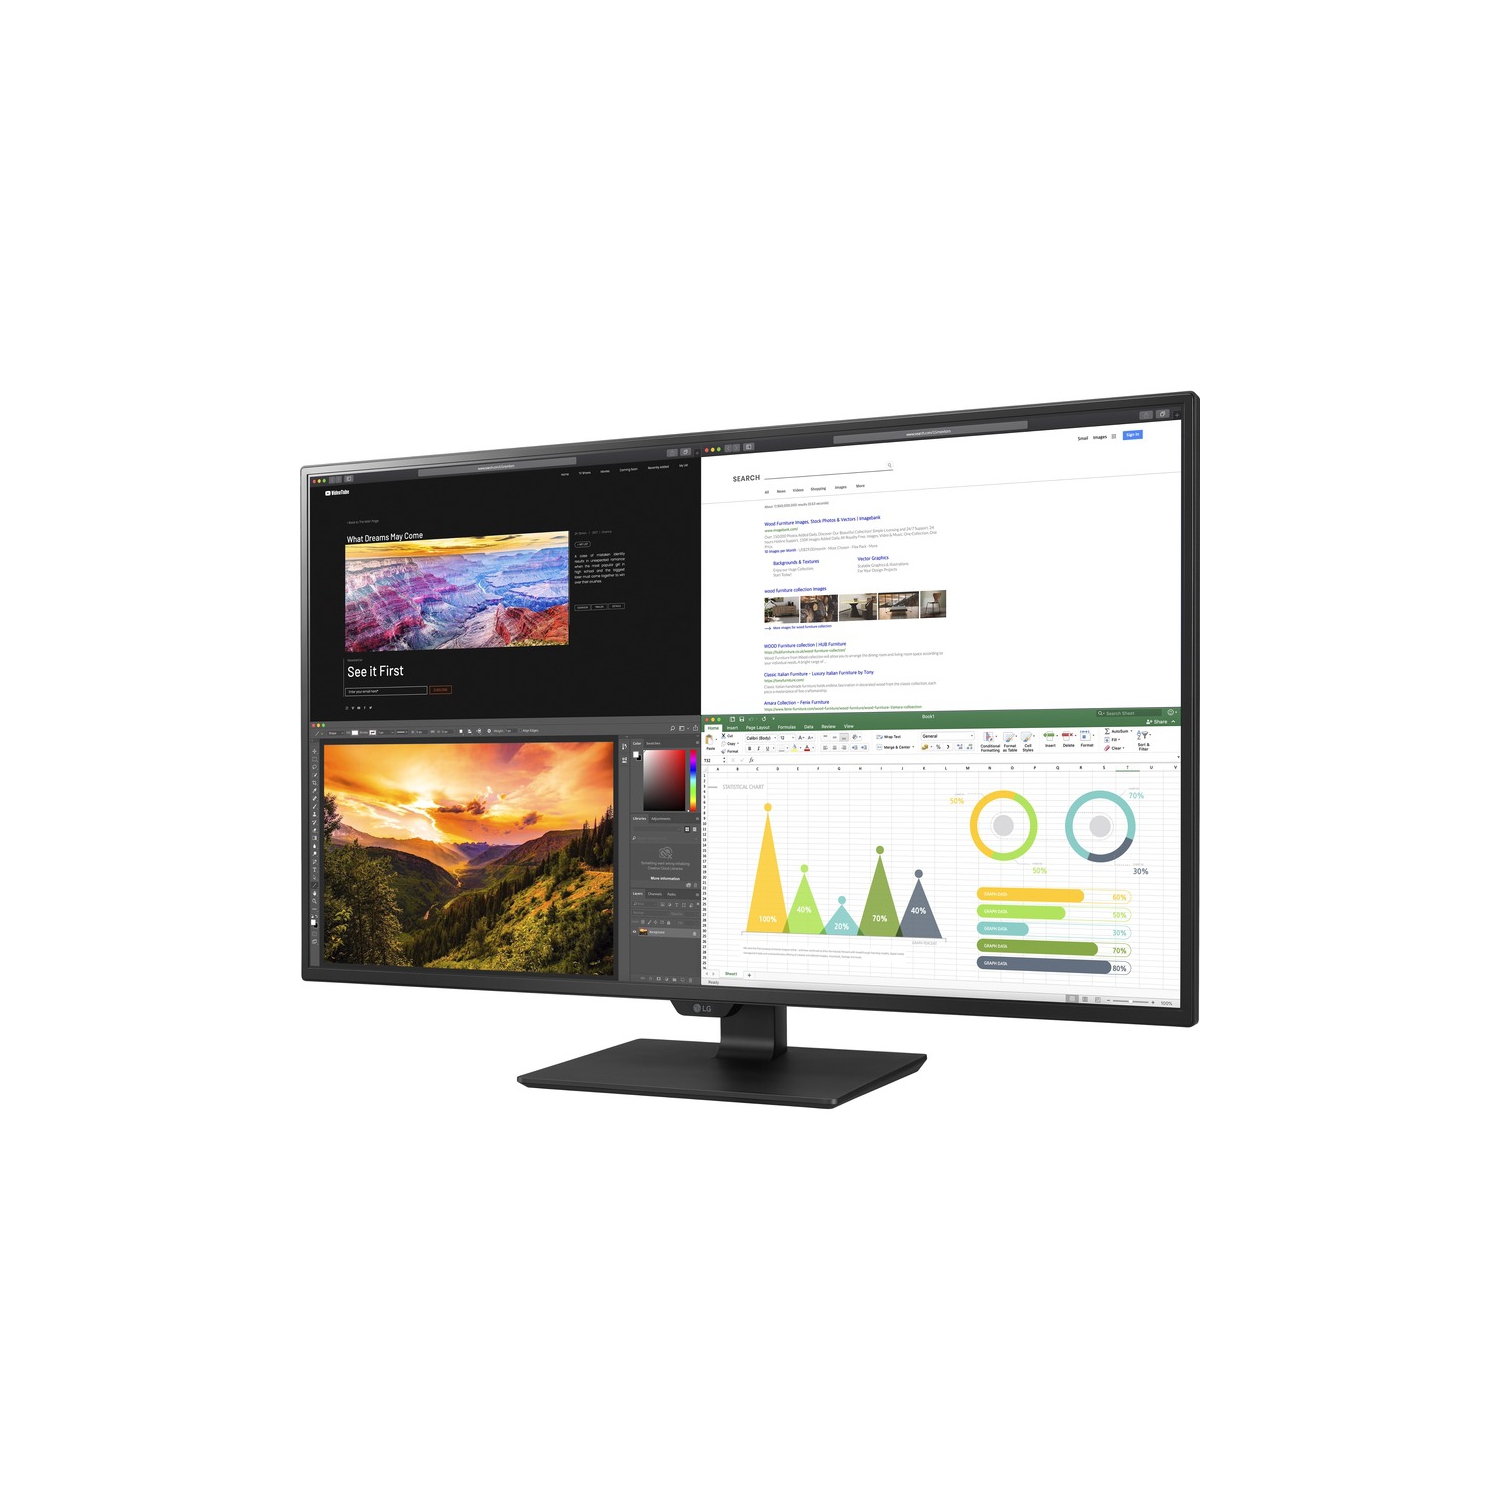 LG 43UN700-B 43" Class UHD (3840 X 2160) IPS Display with USB Type-C and HDR10 with 4 HDMI "puts Monitor